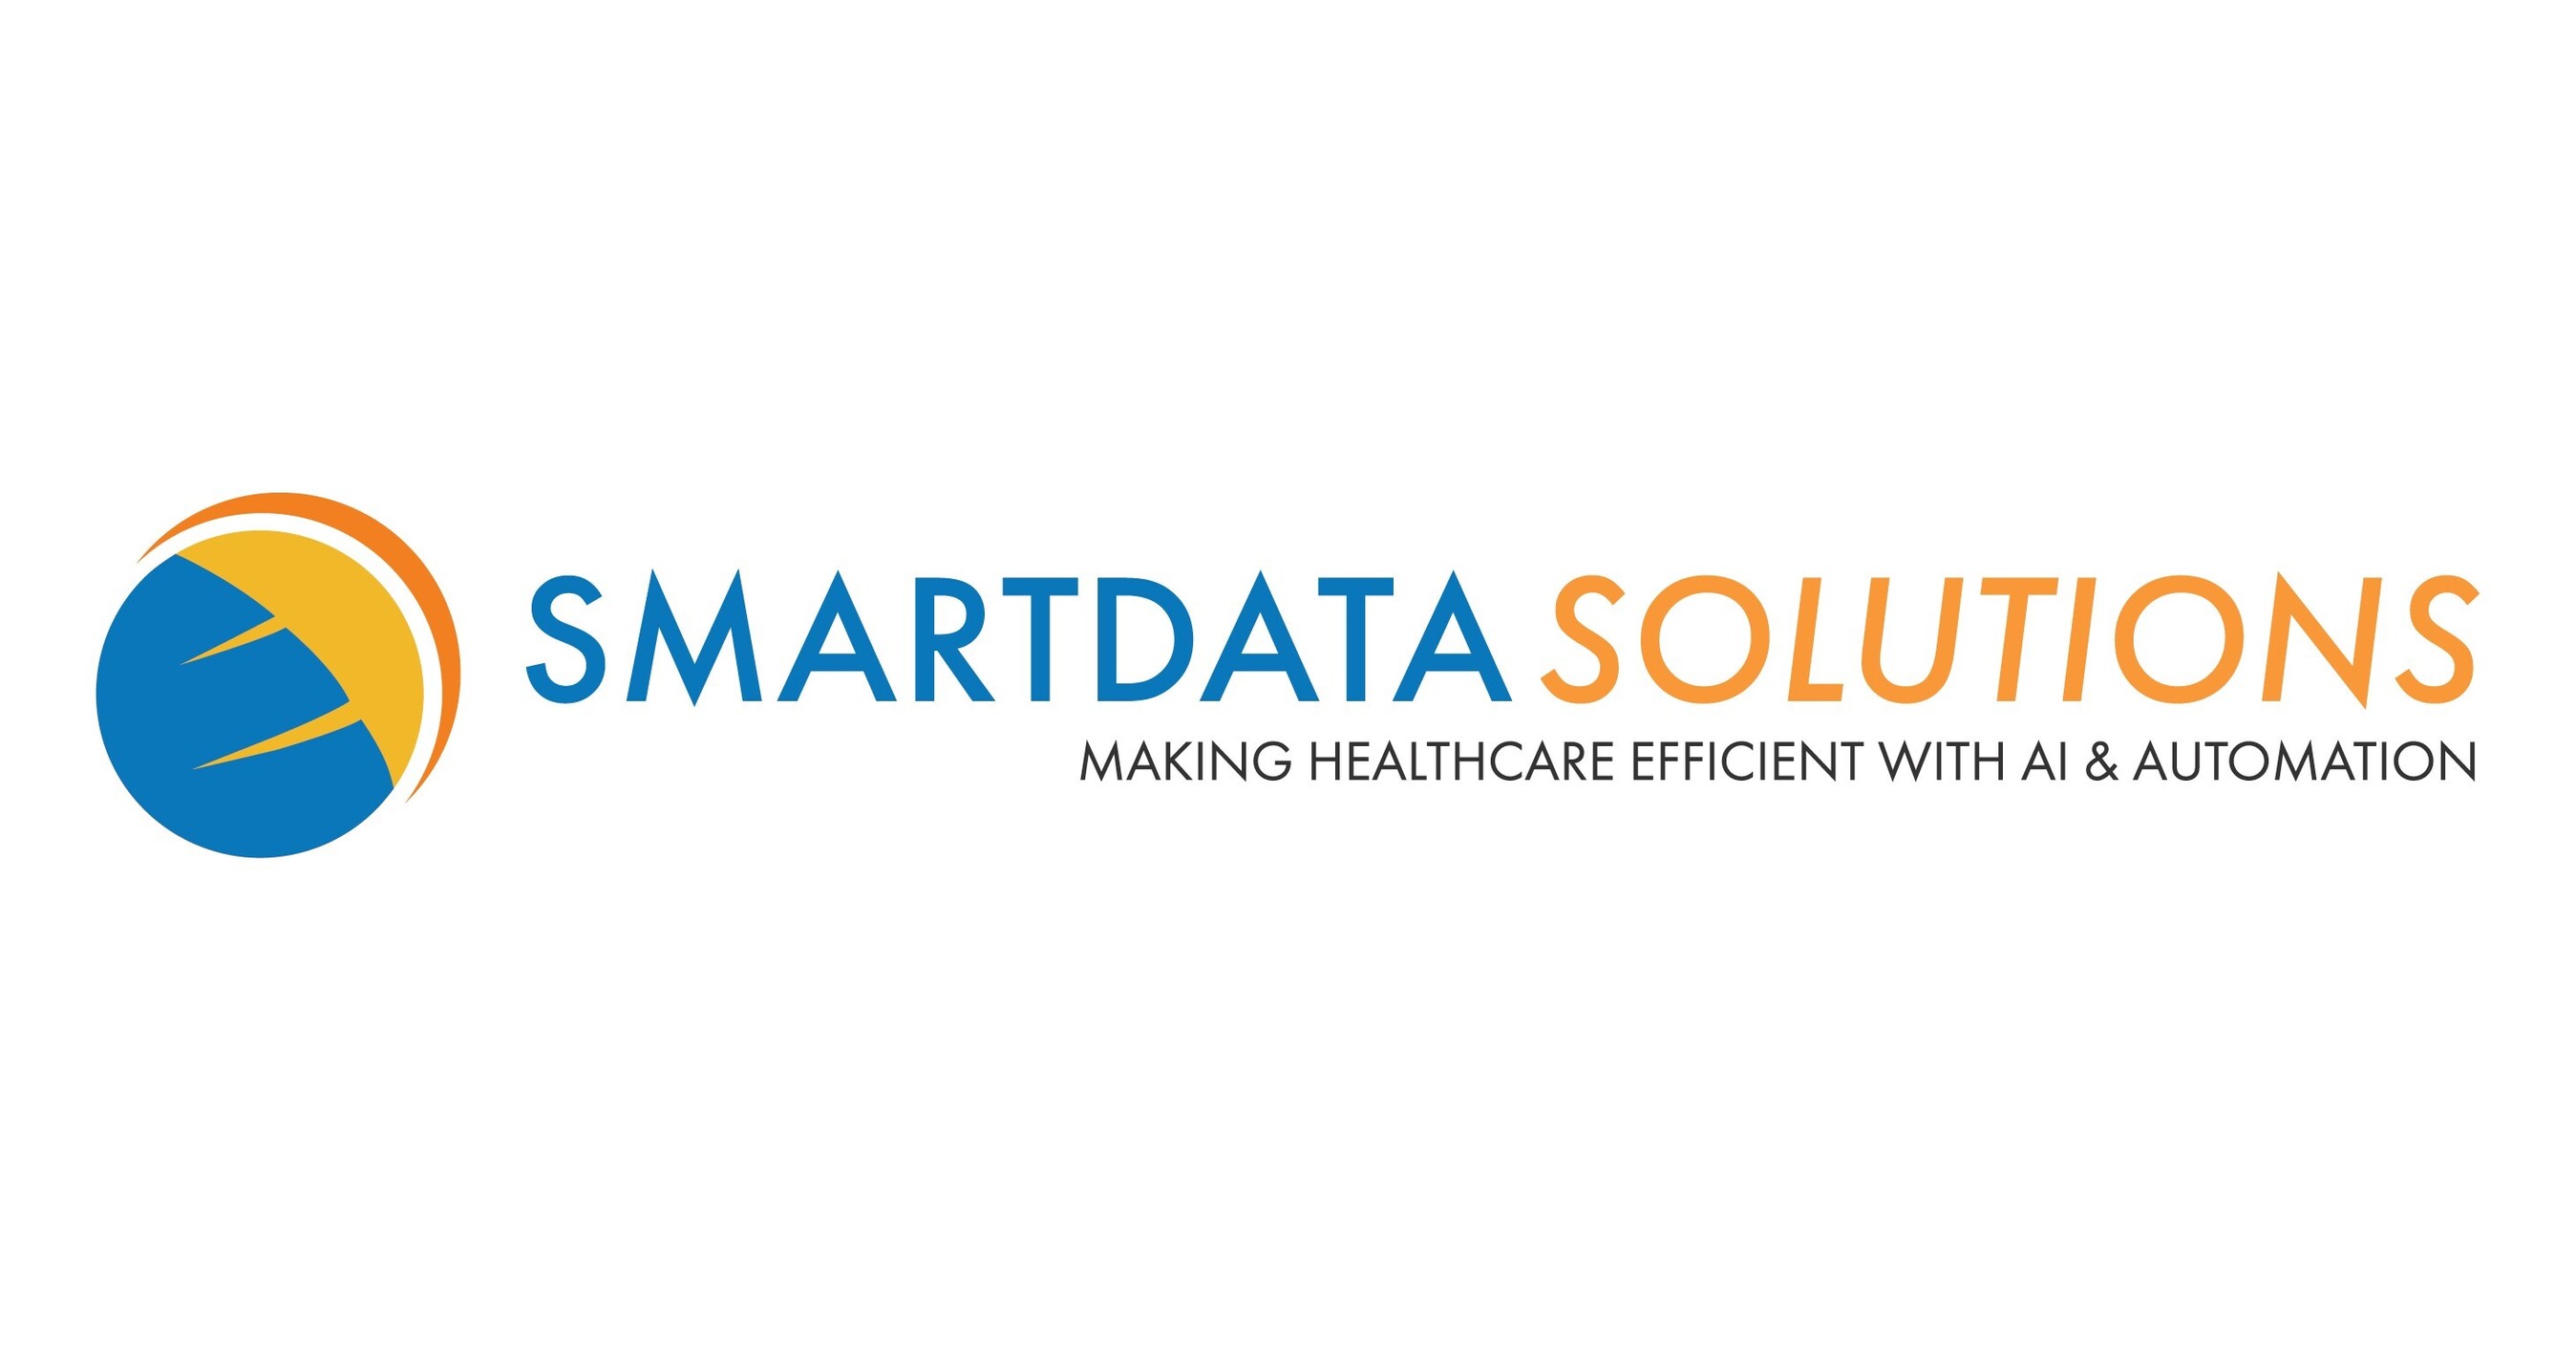 SMART DATA SOLUTIONS ANNOUNCES SHASHI YADIKI AS CHIEF EXECUTIVE OFFICER